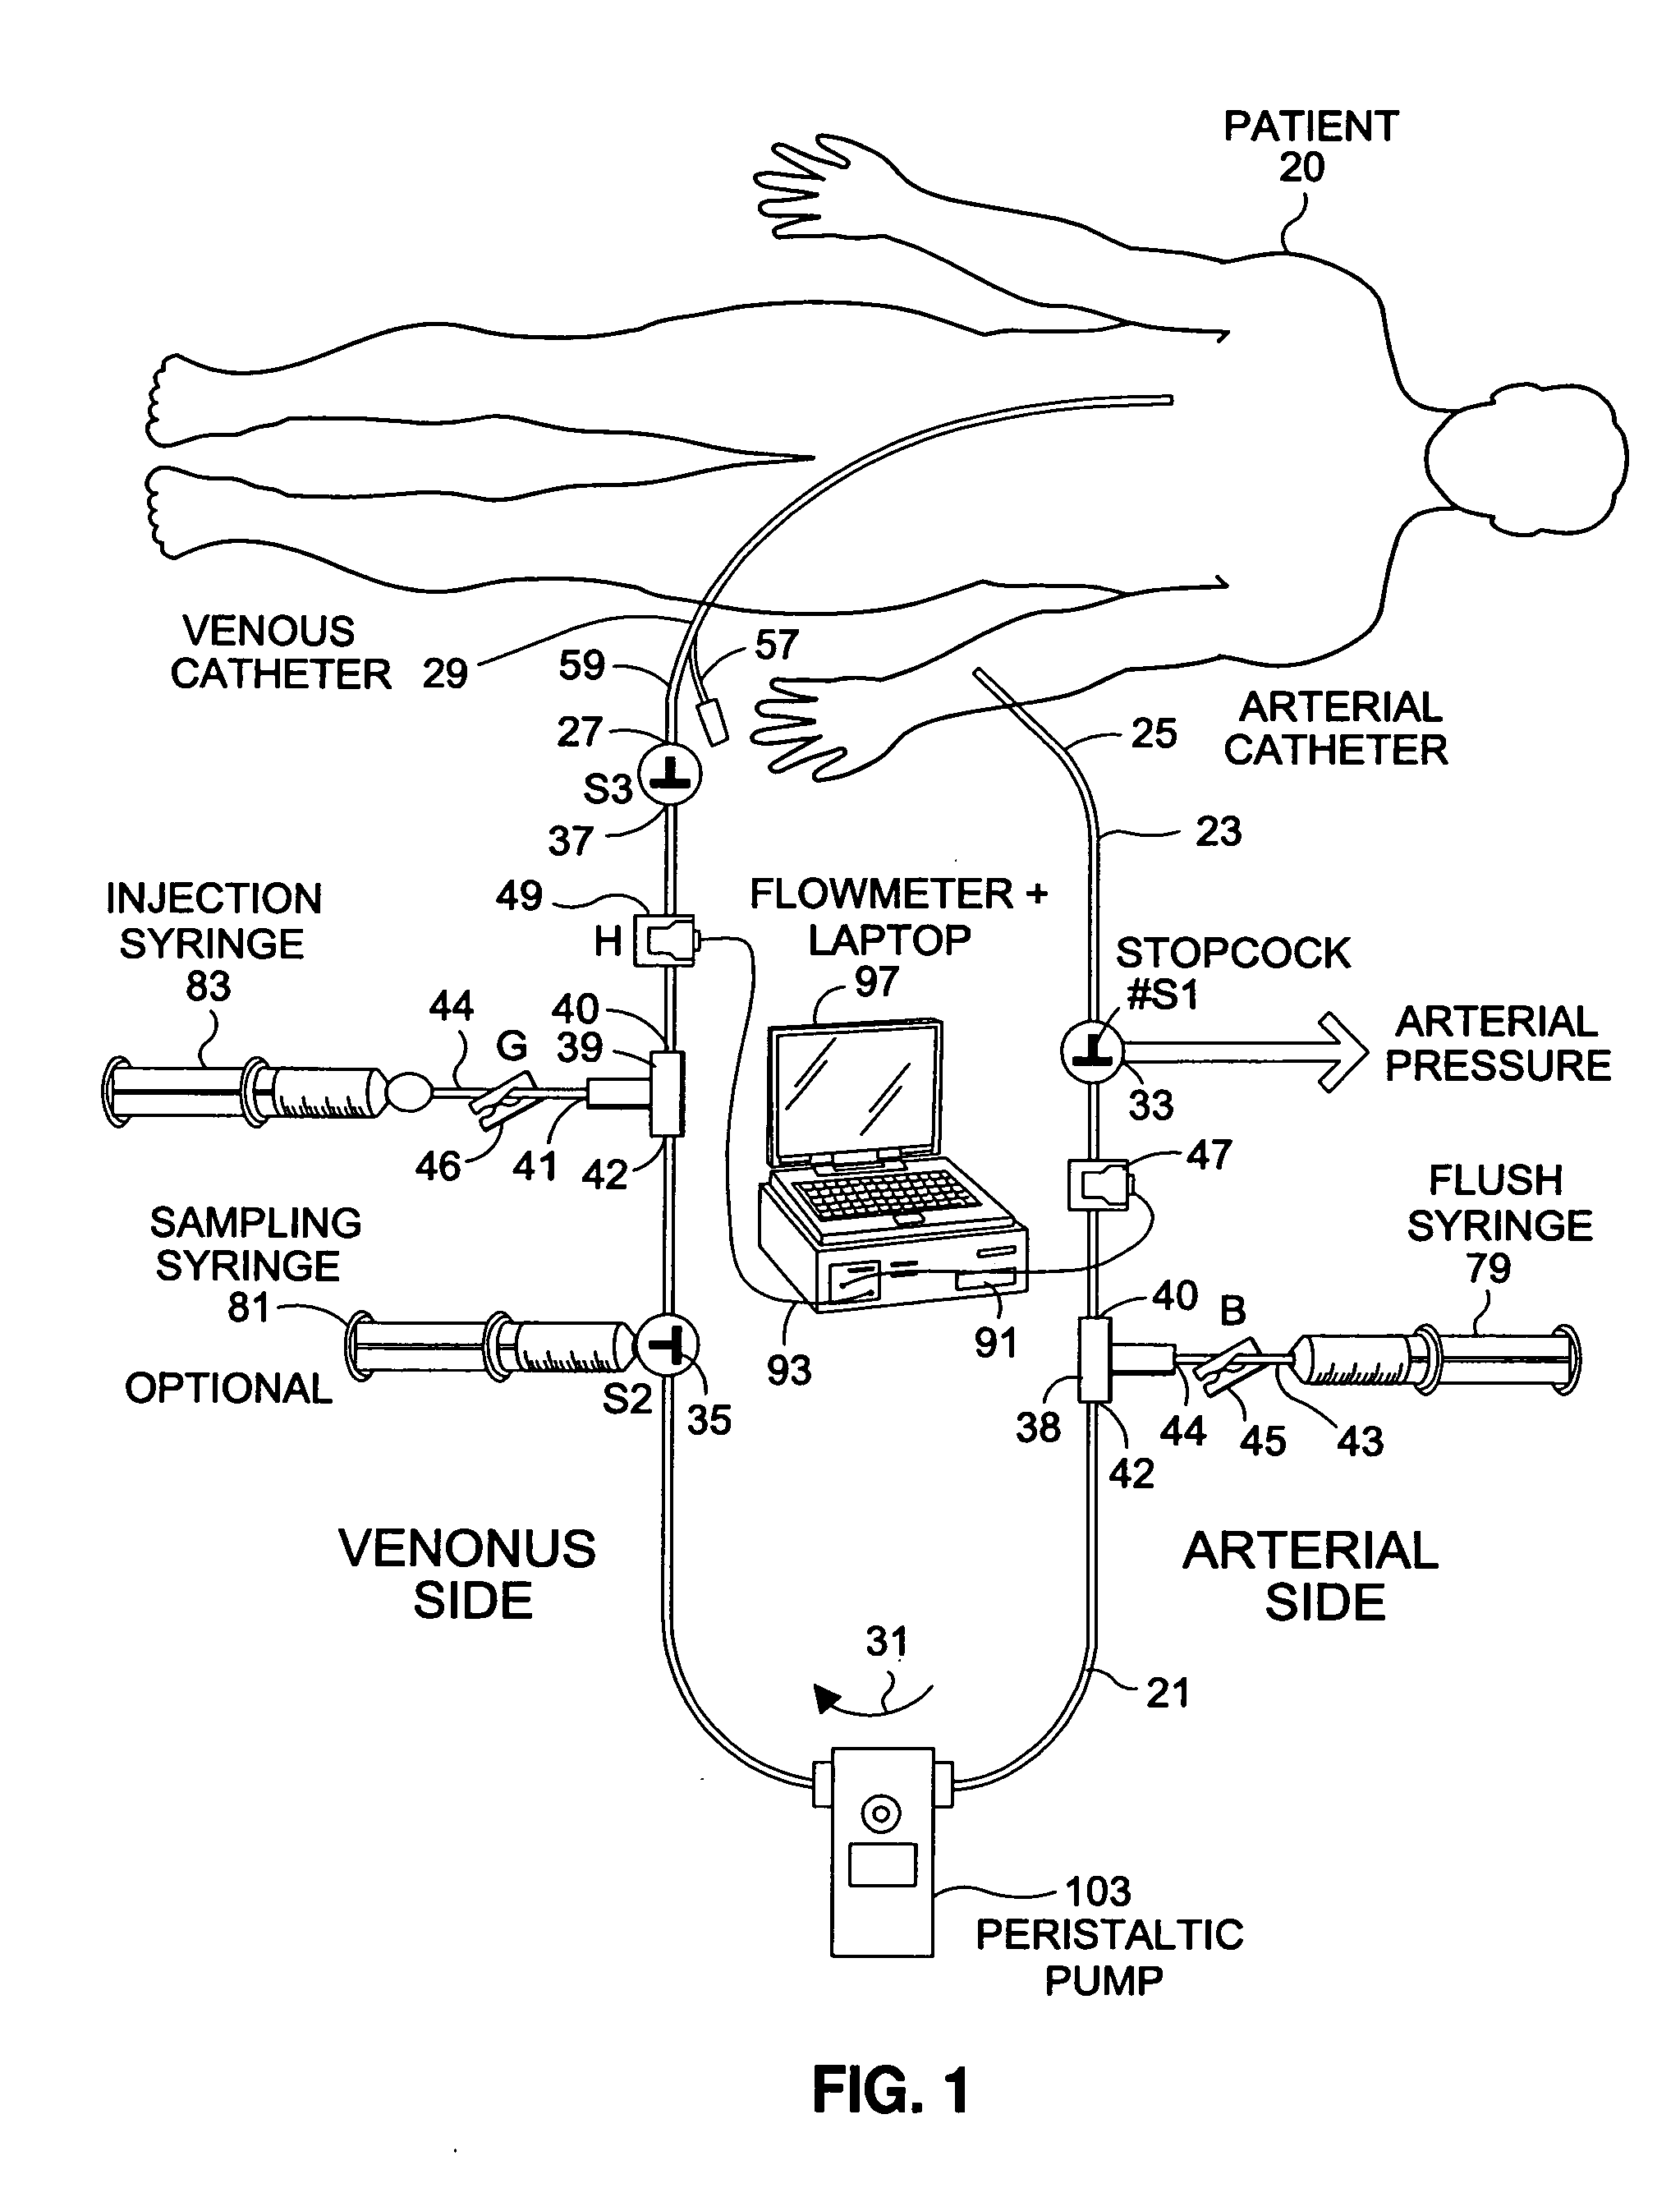 System and method for diverting flow to facilitate measurement of system parameters